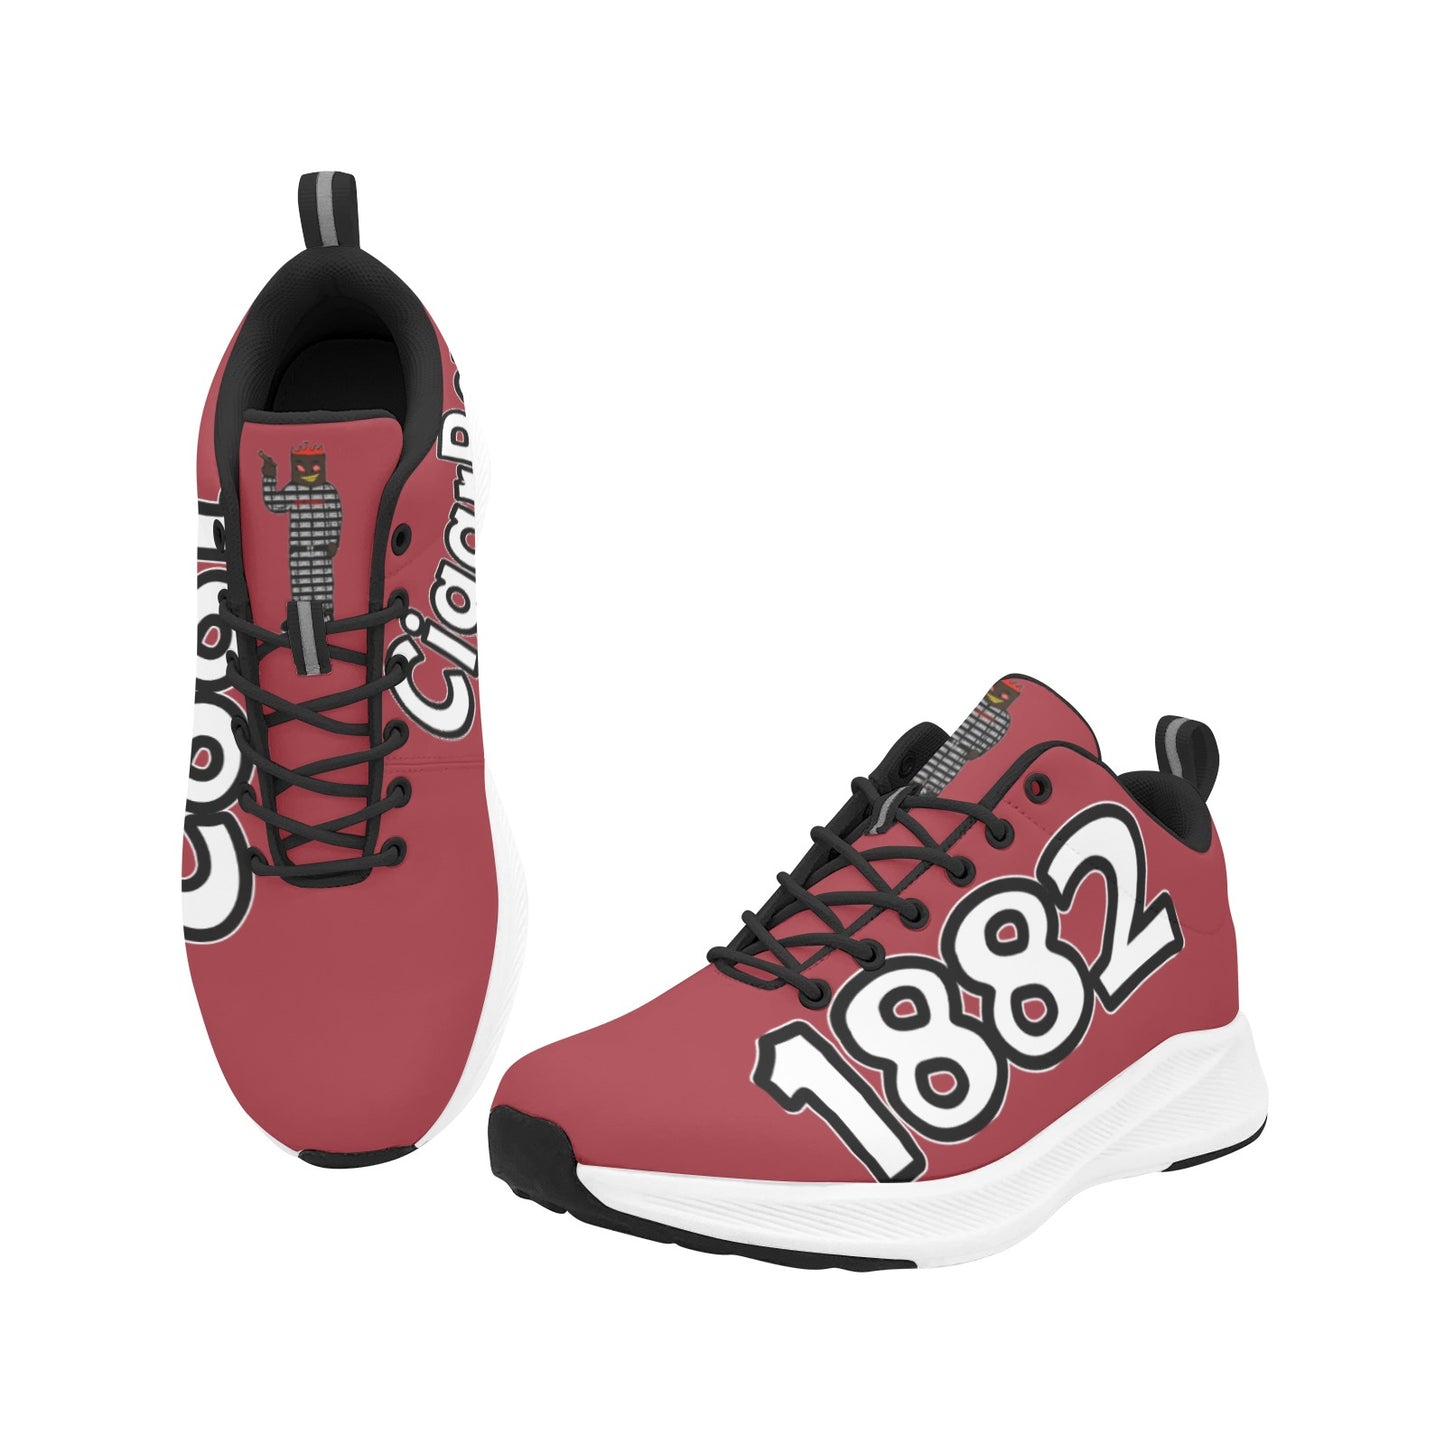 1882 CBZ RUNNERS SHOES